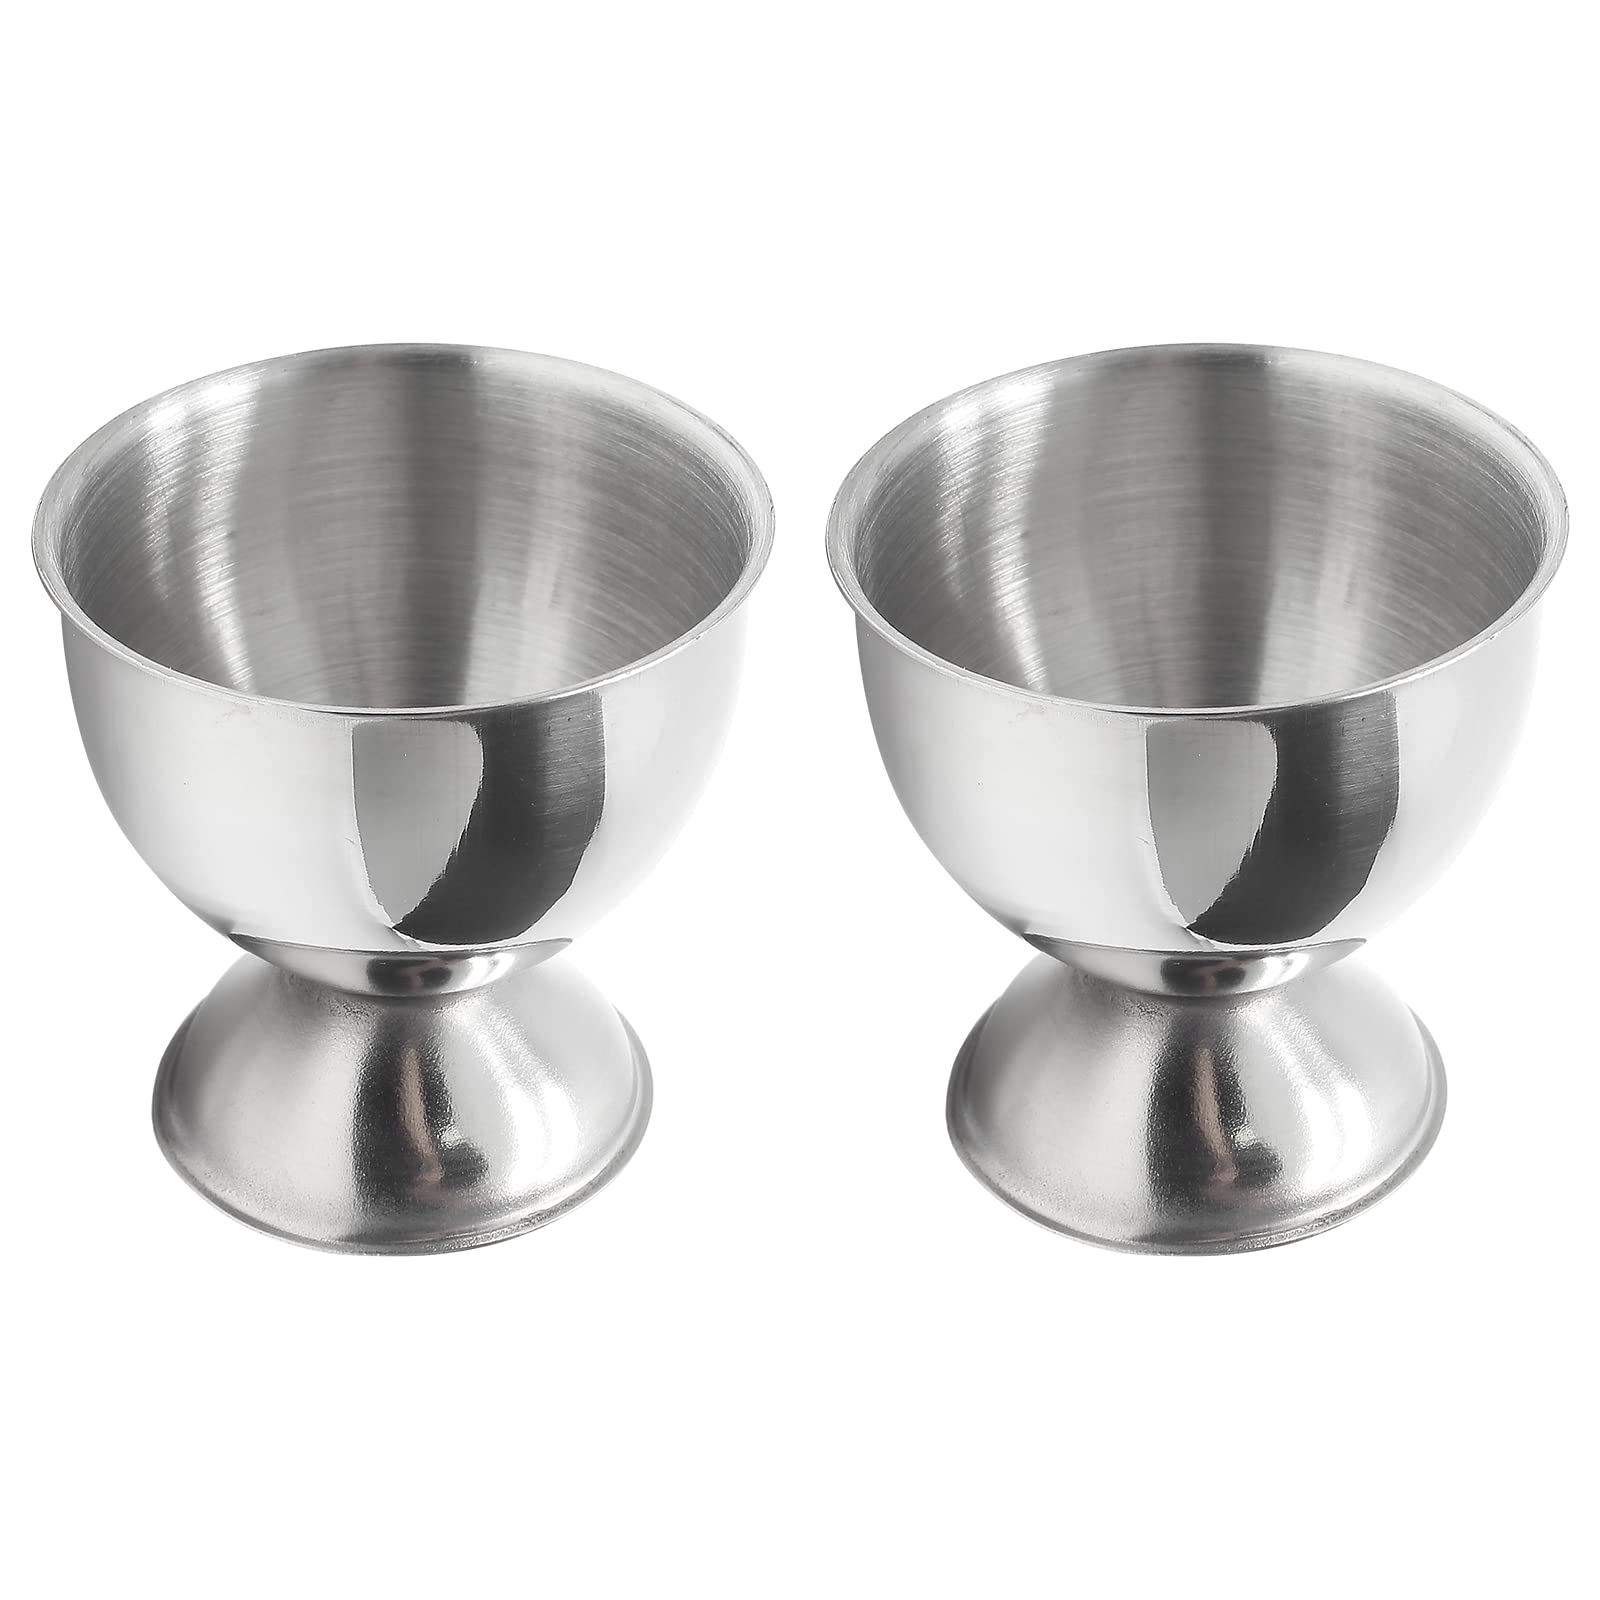 Qjaiune 2pcs Silver Egg Cups Stainless Steel Egg Holder, Soft Boiled & Hard Boiled Egg Tray Kitchen Gadgets Tools, 46mm x 48mm Small Egg Cup